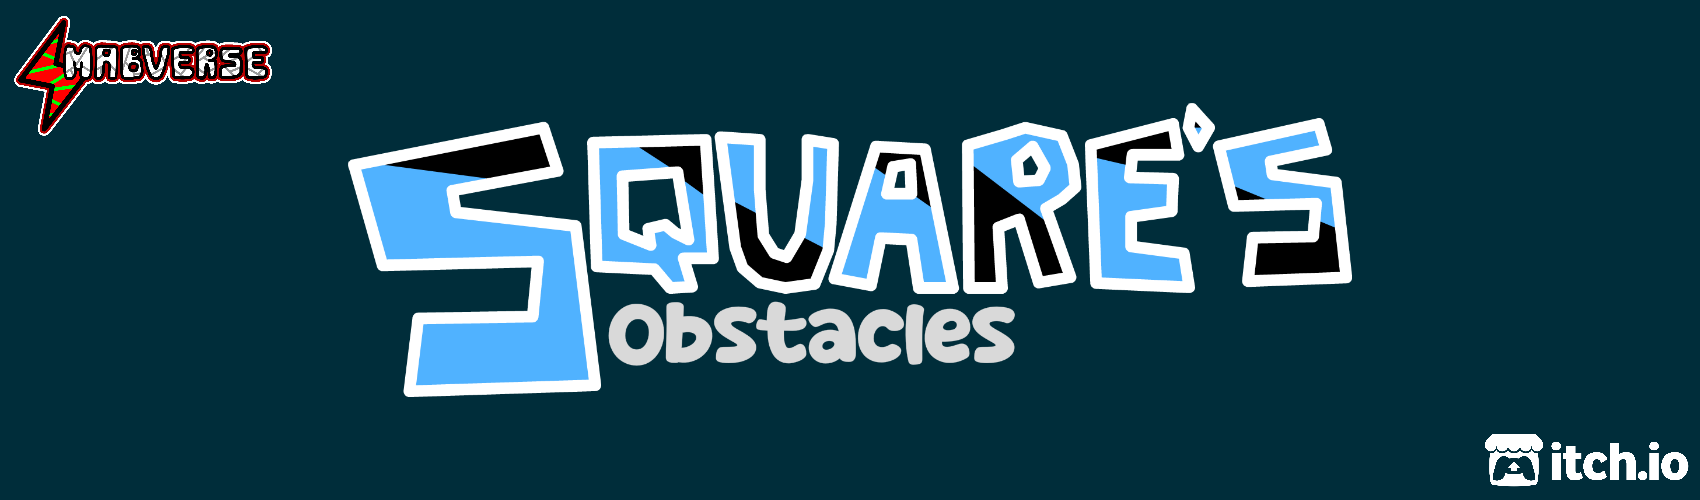 Square's Obstacles